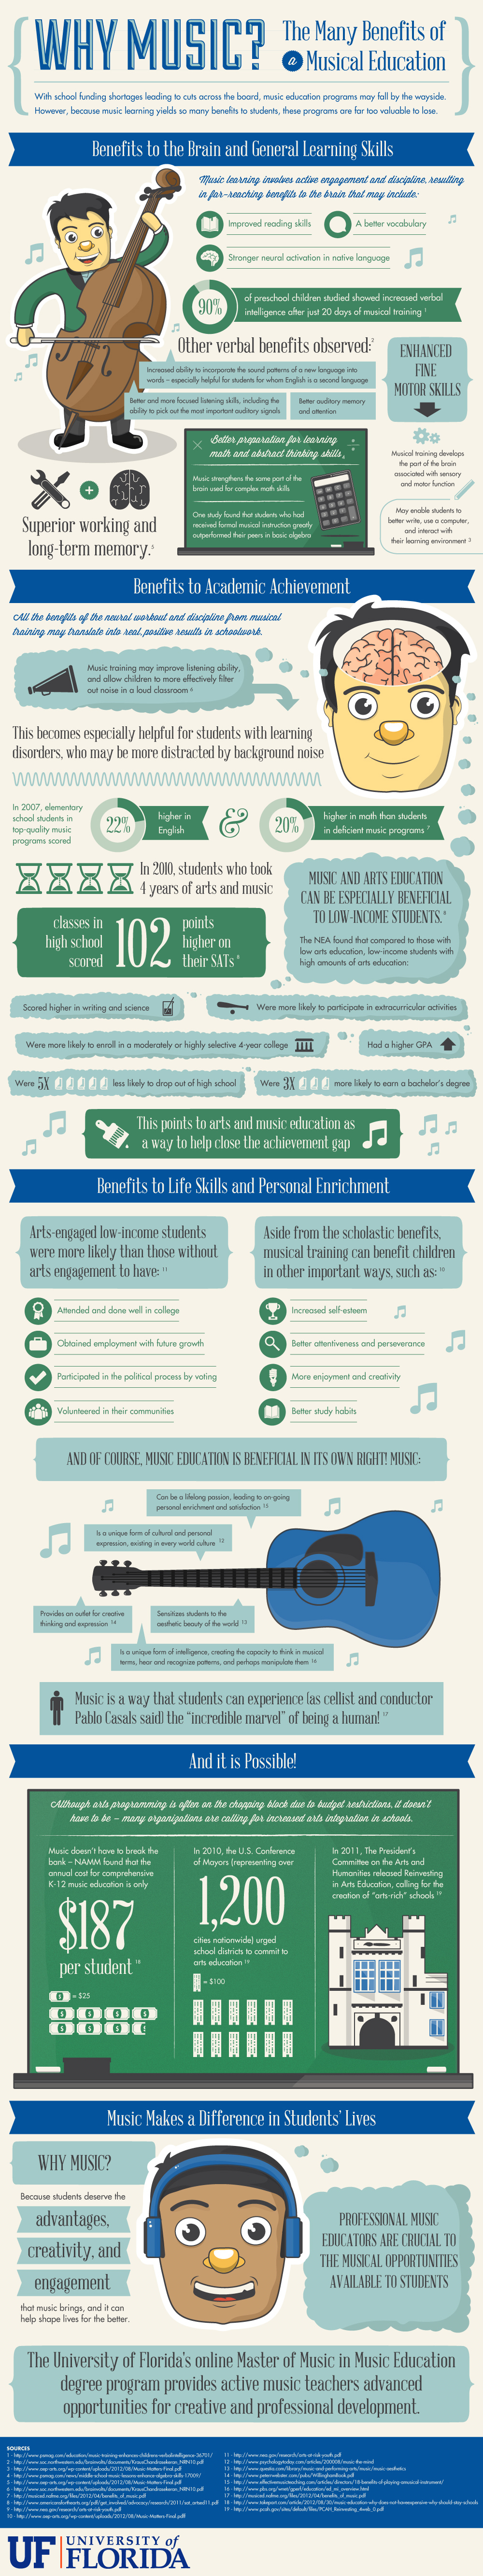 Why Music? The Benefits of a Musical Education